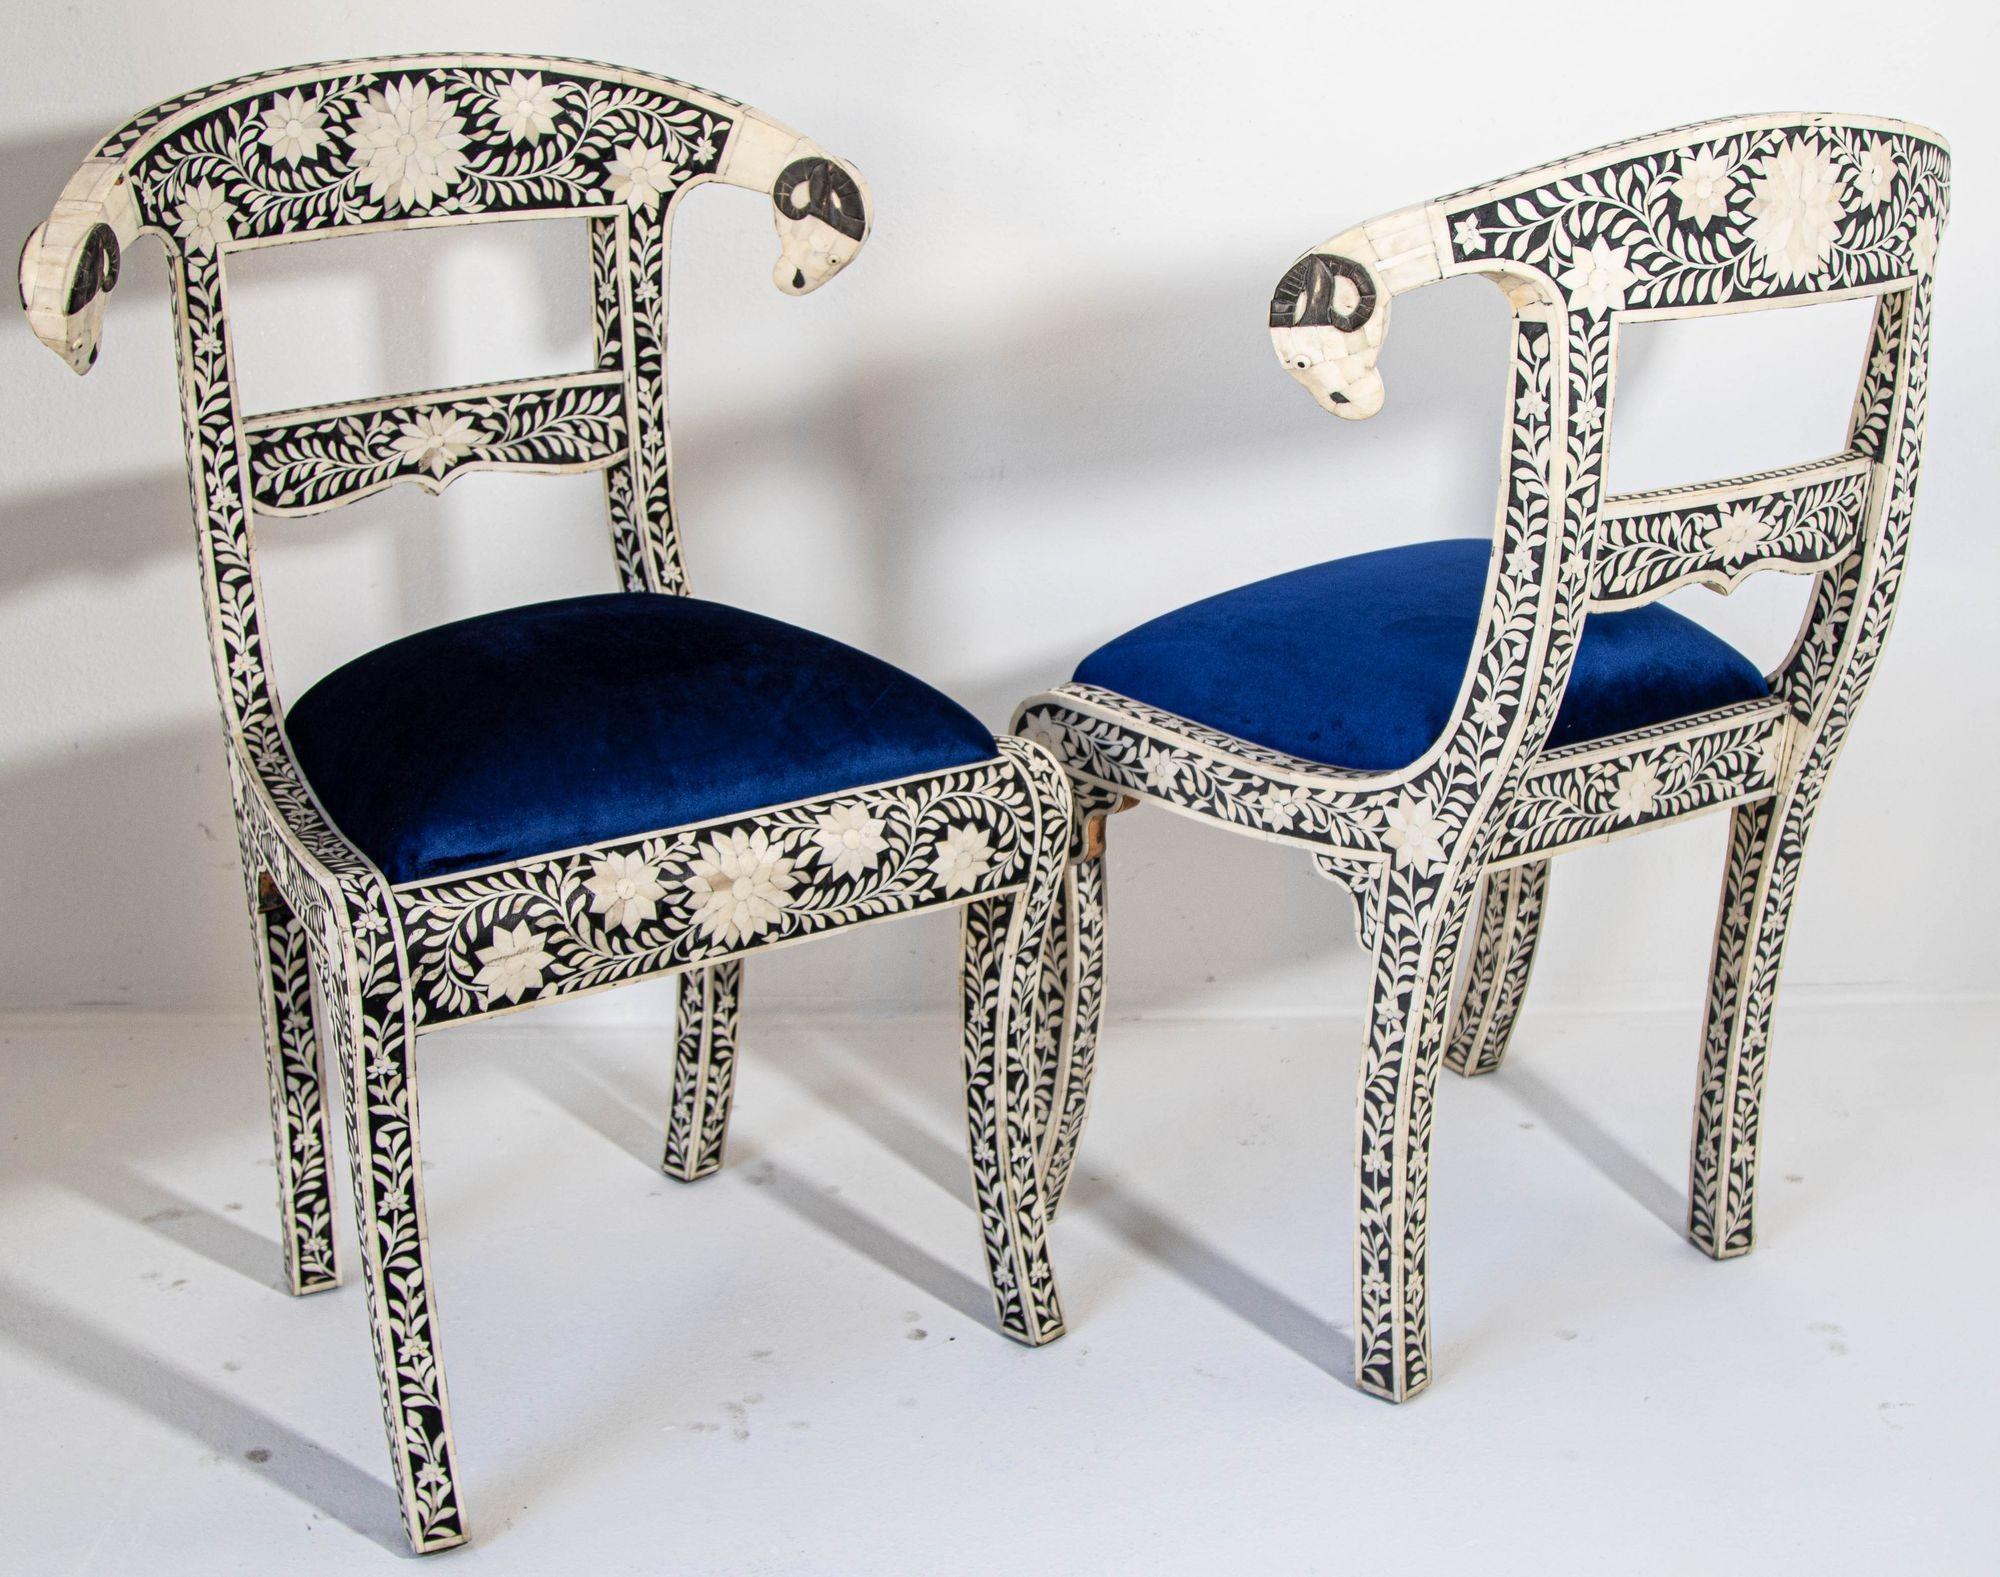 Pair of Antique Anglo-Indian Side Chairs with Ram's Head Bone Inlay Royal Blue Seat.
Anglo-Indian black and white dowry side chair with ram's head.
This stunning chair feature a wooden frame inlaid with intricate and detailed floral design in white